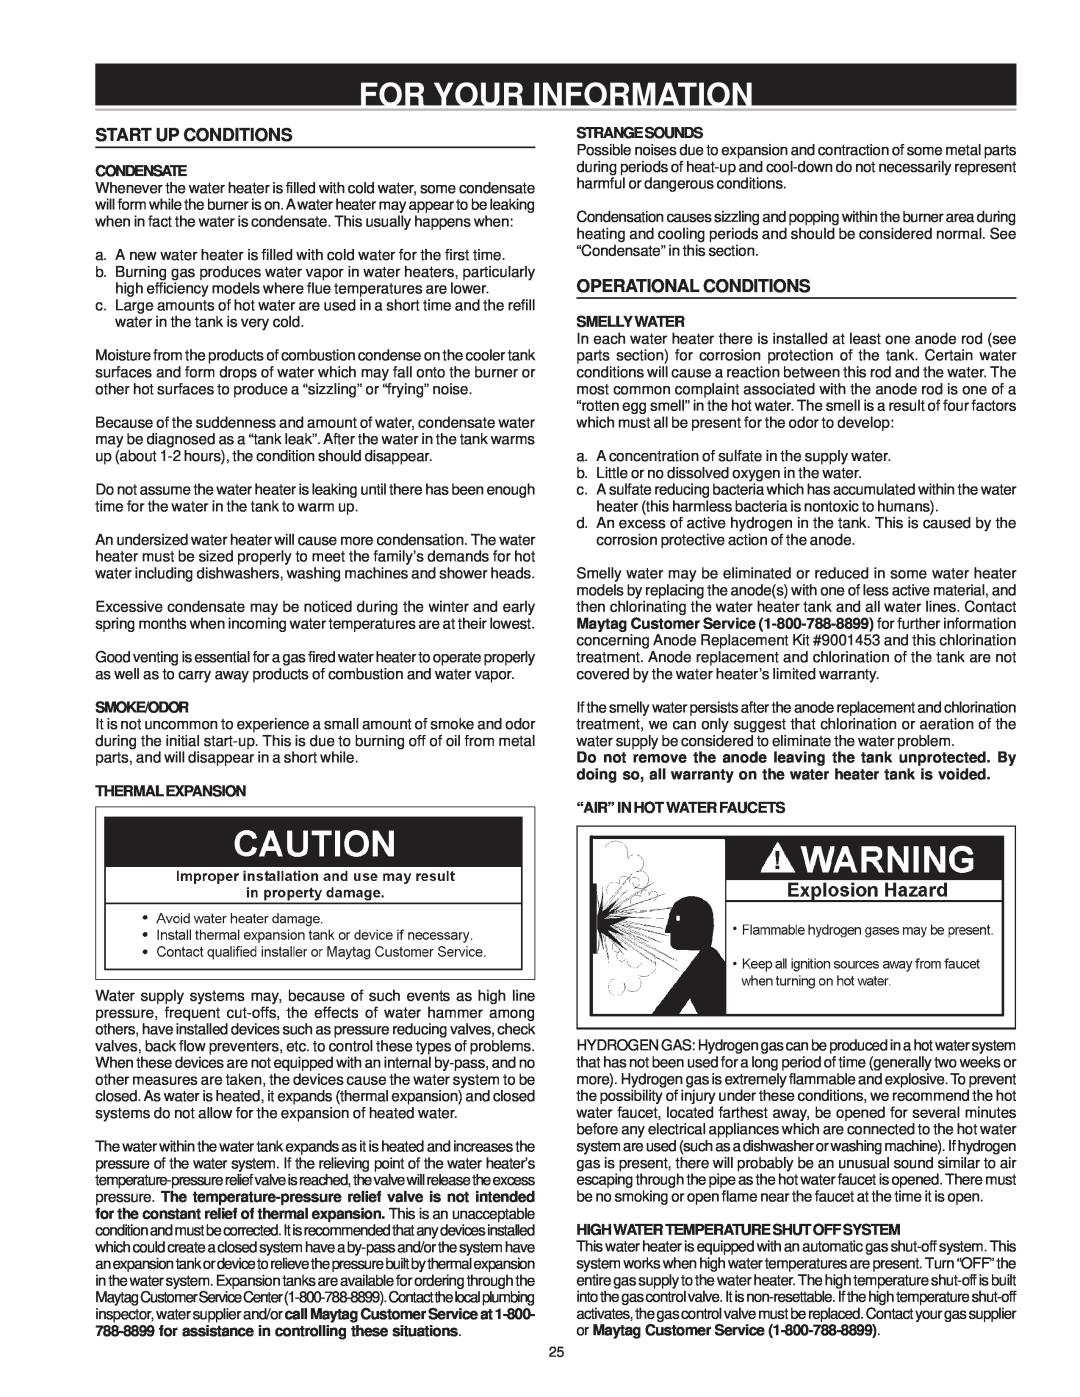 Maytag HV640YBVITCGA manual For Your Information, Condensate, Smoke/Odor, Thermalexpansion, Strangesounds, Smellywater 